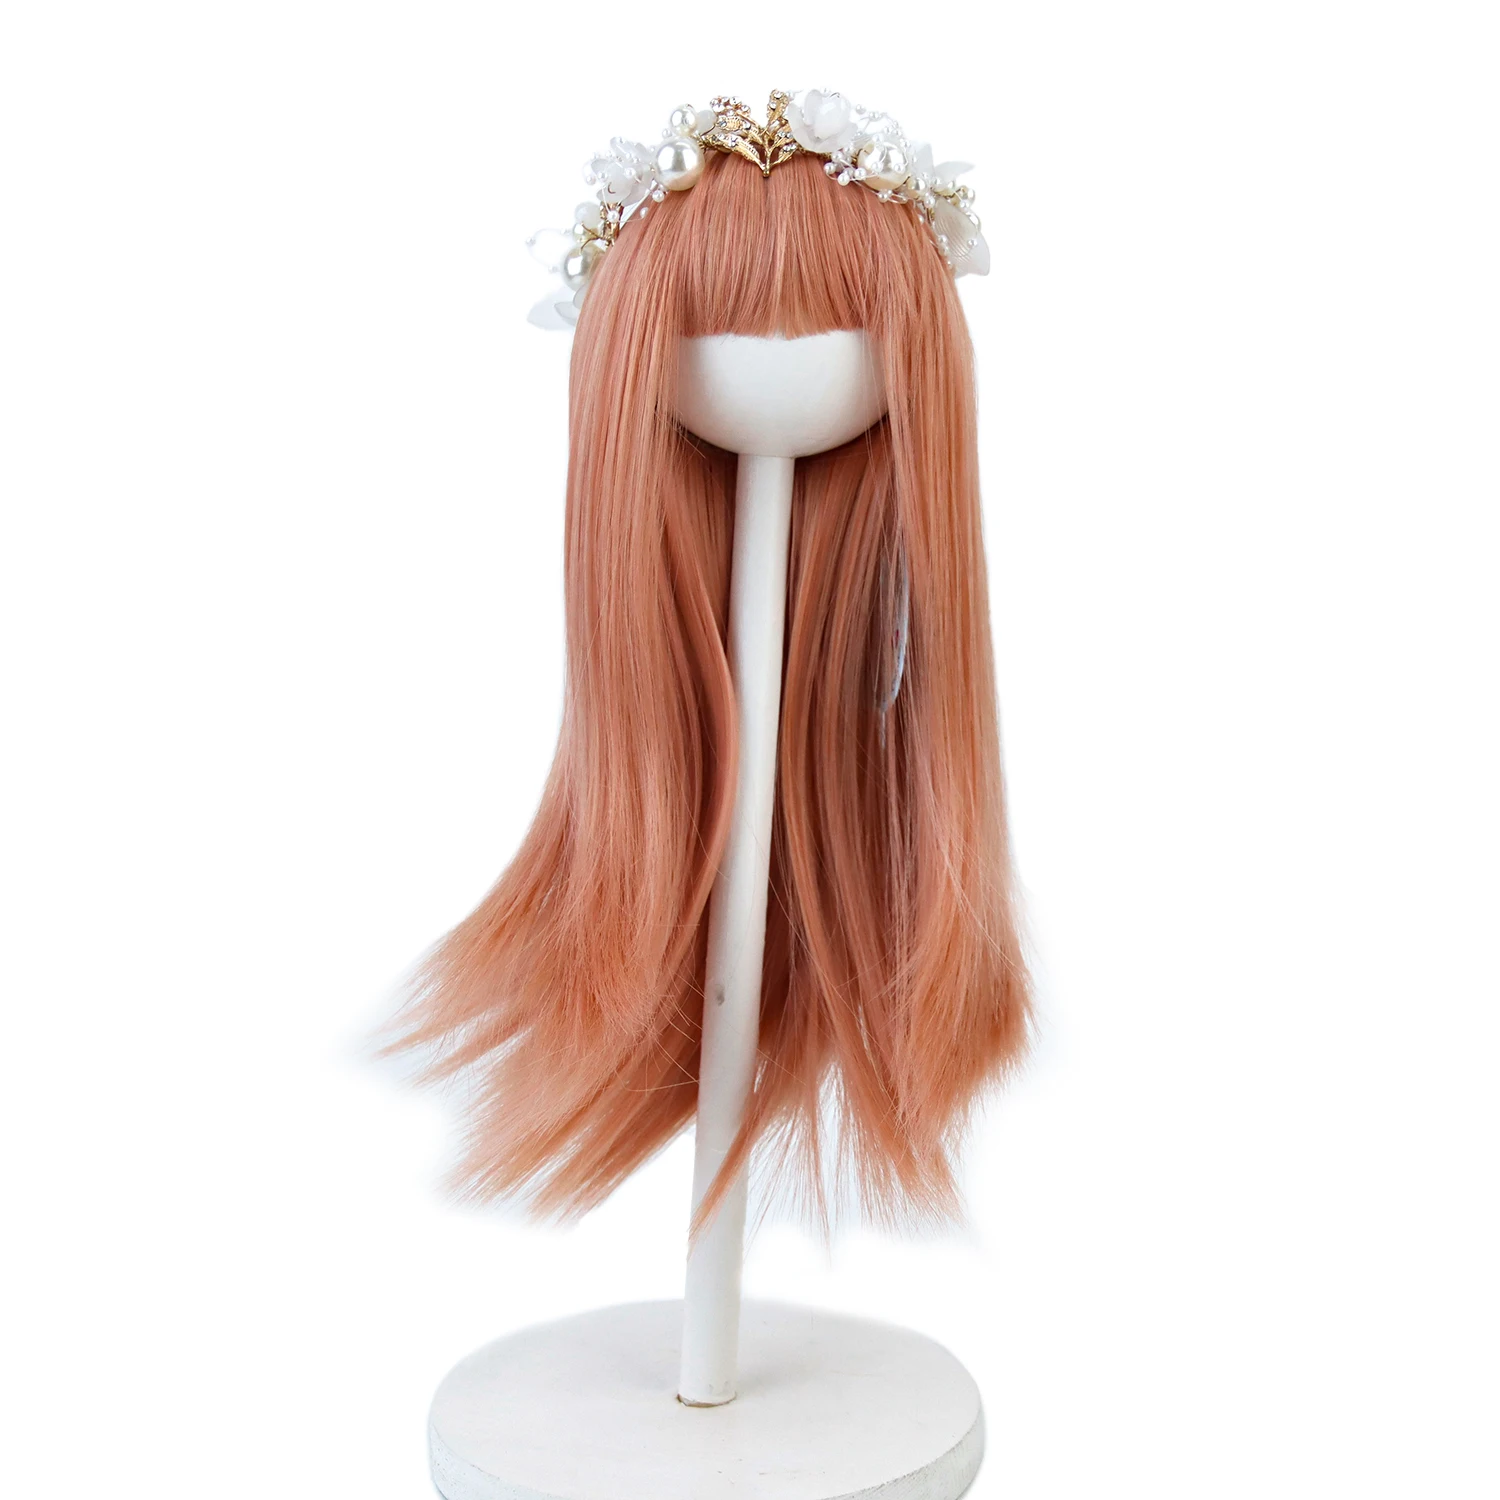 Doll Wig Long Natural Straight With Bangs Heat Resistant Synthetic Fiber Girls Doll Hair For 18'' American Doll long water wave none lace ginger orange high temperature wigs for women afro cosplay party daily synthetic hair wigs with bangs